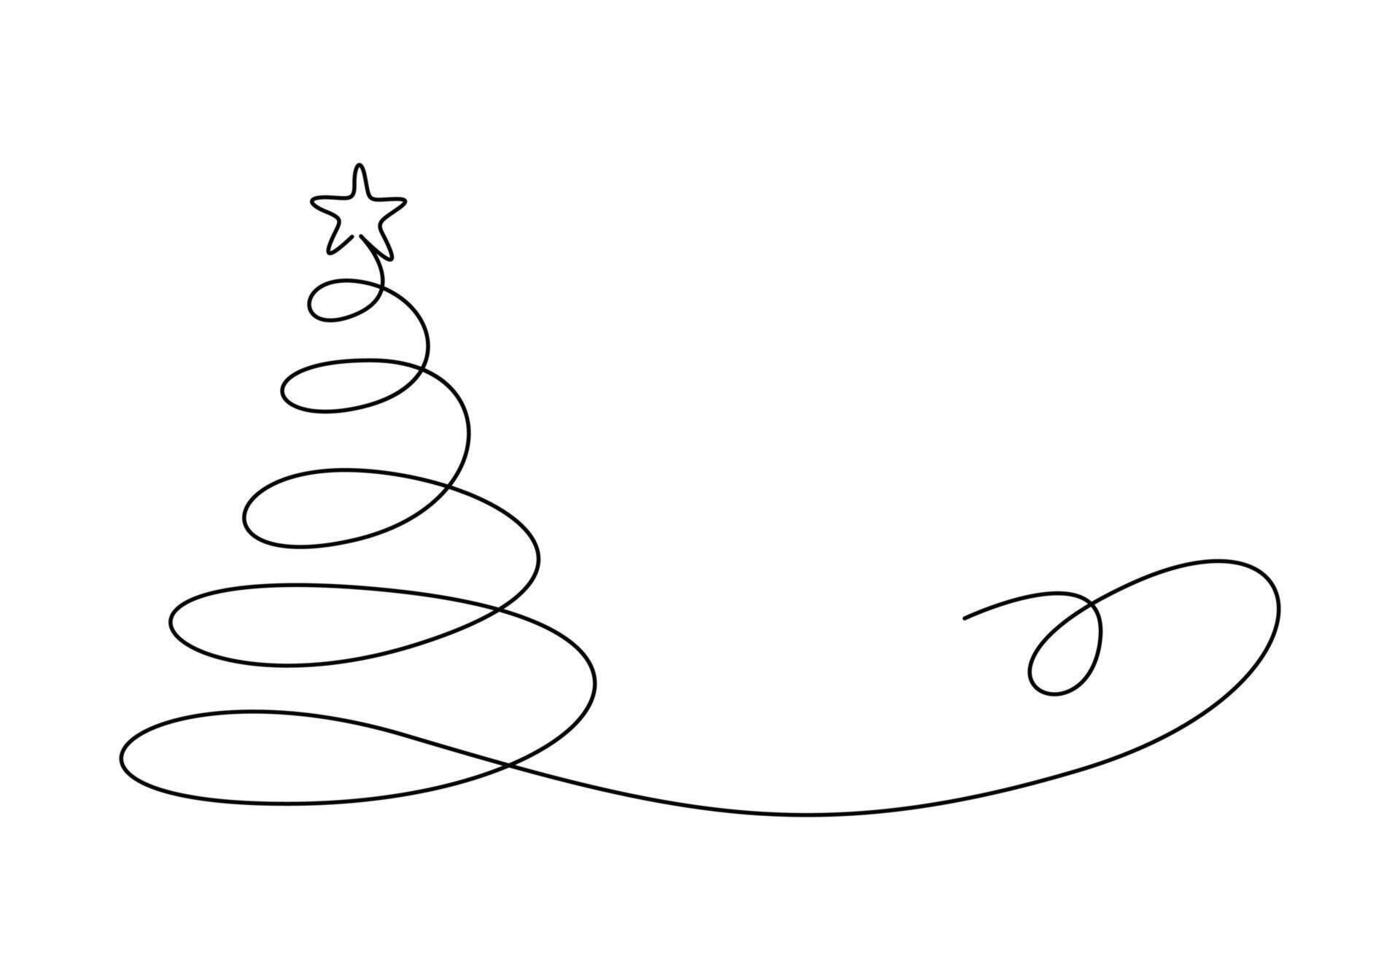 Christmas tree continuous one line drawing vector illustration. Isolated on white background vector illustration